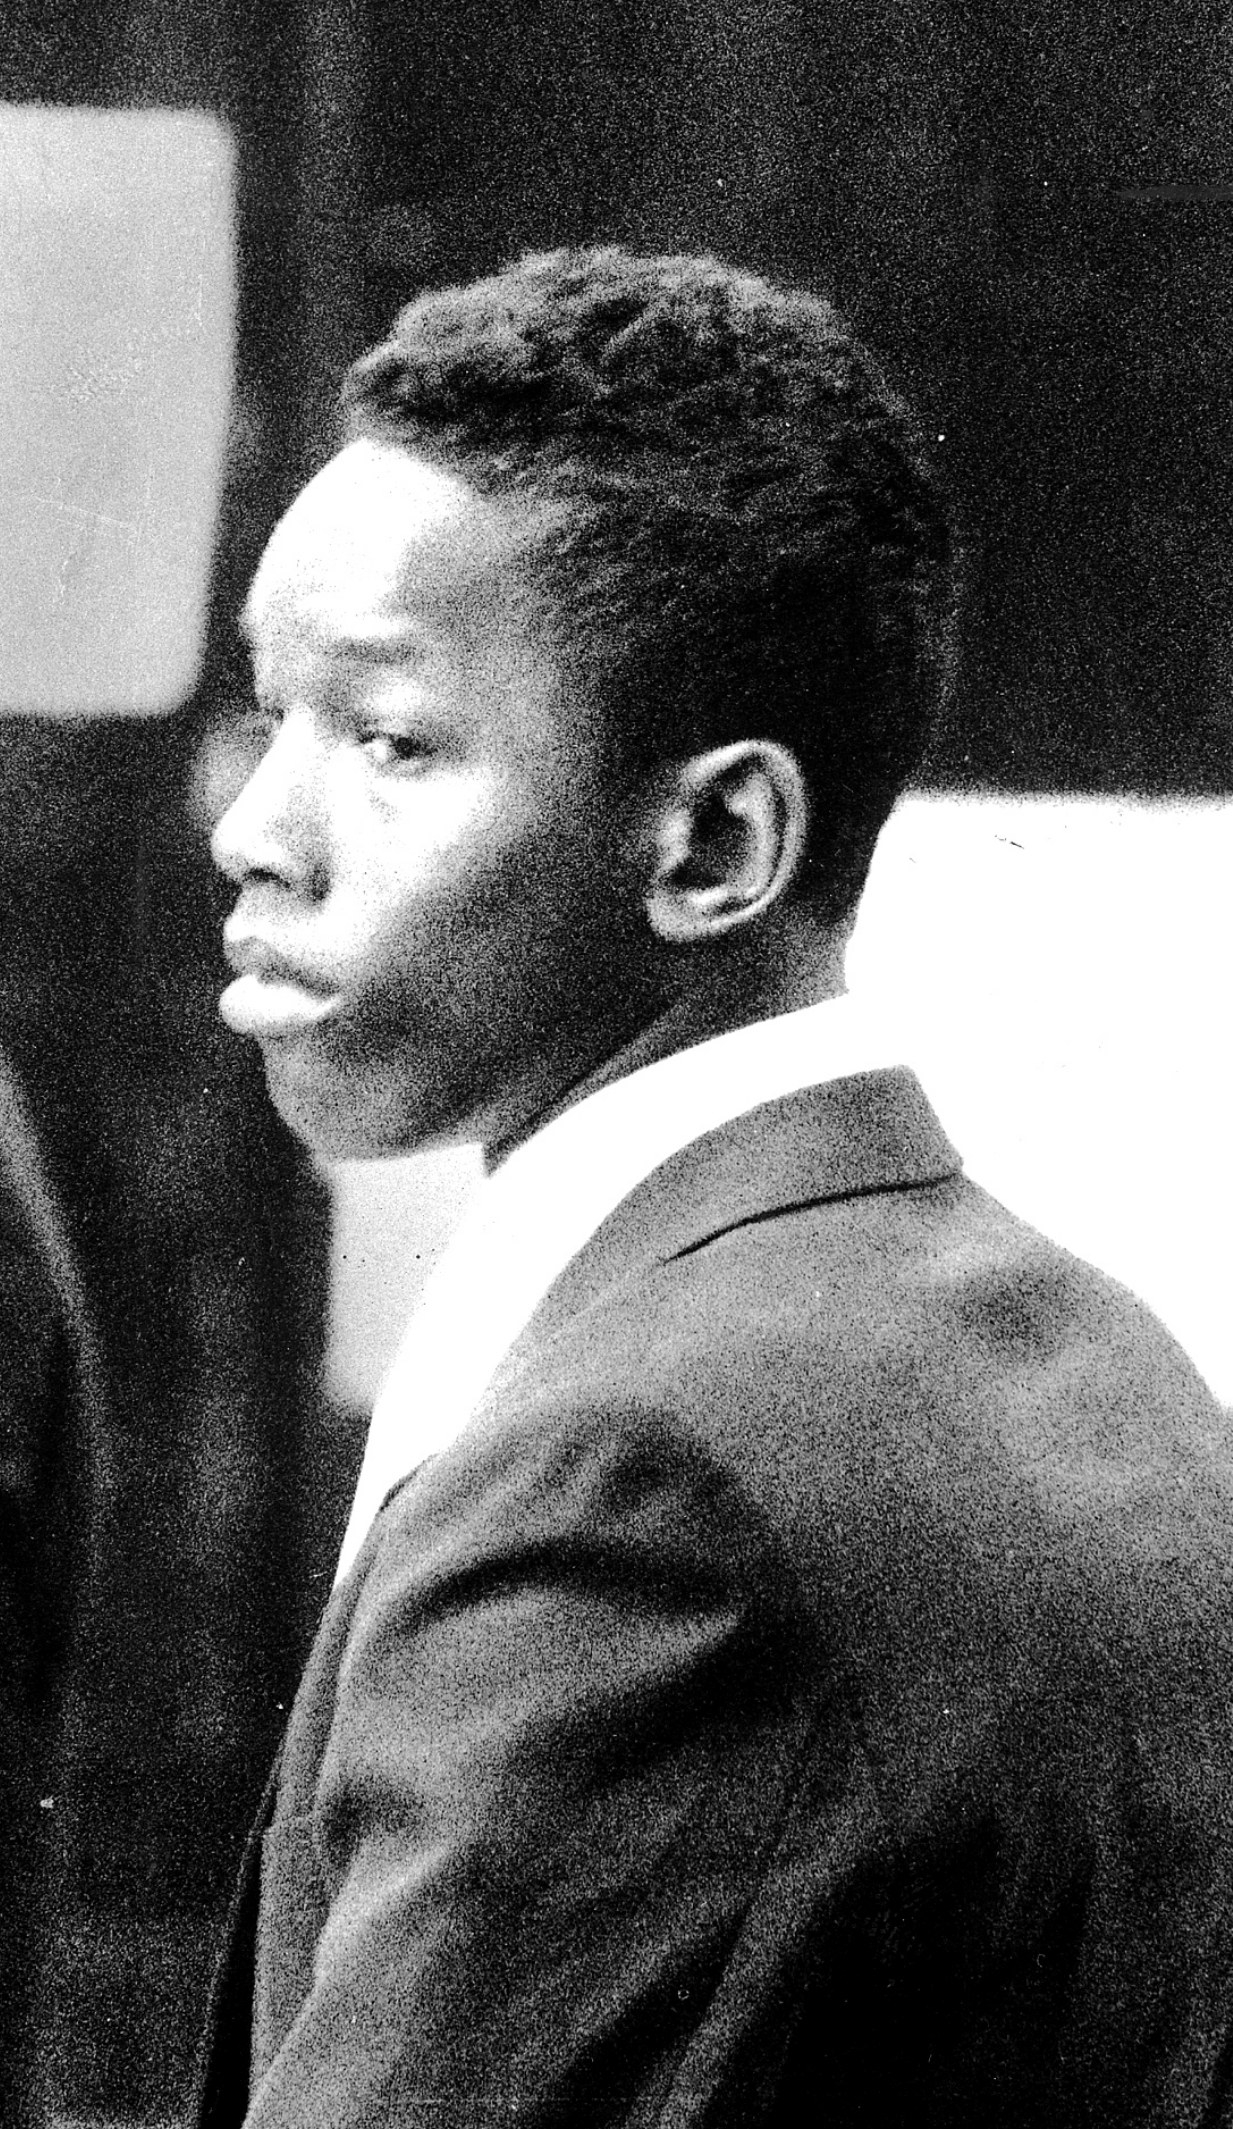 Wise in court in 1989